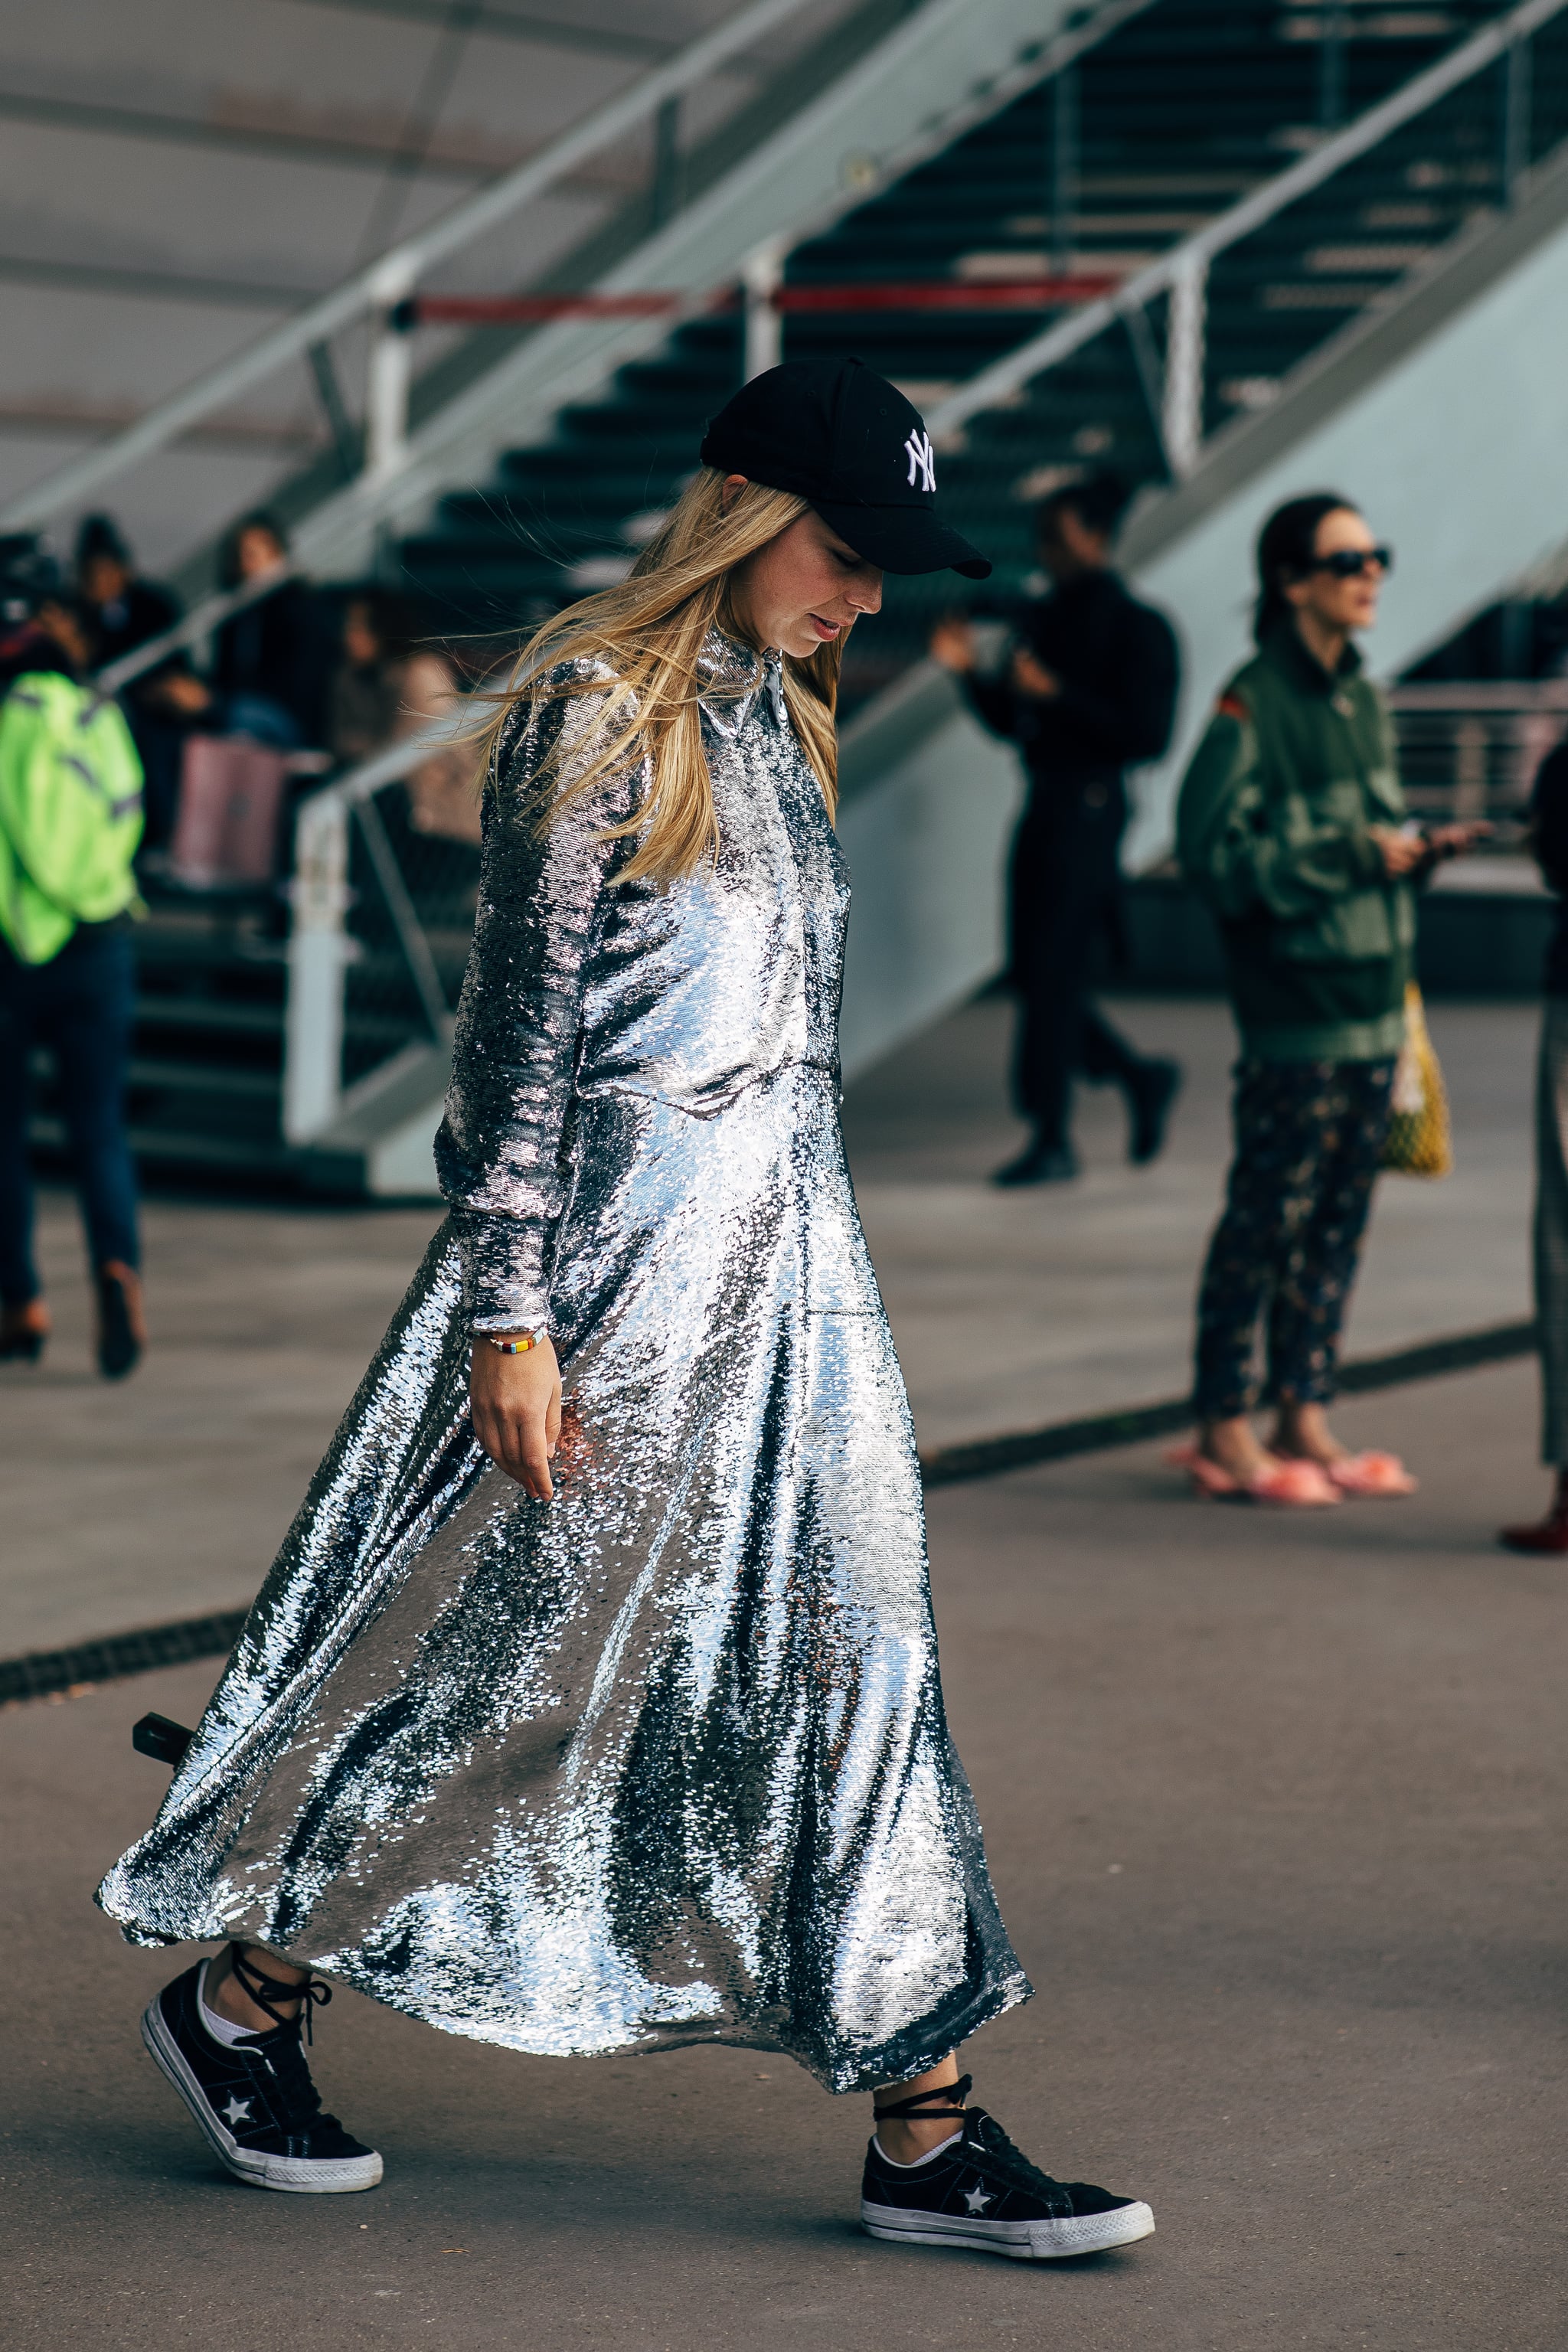 Charlotte Groeneveld wearing silver dress, Louis Vuitton sneakers, News  Photo - Getty Images